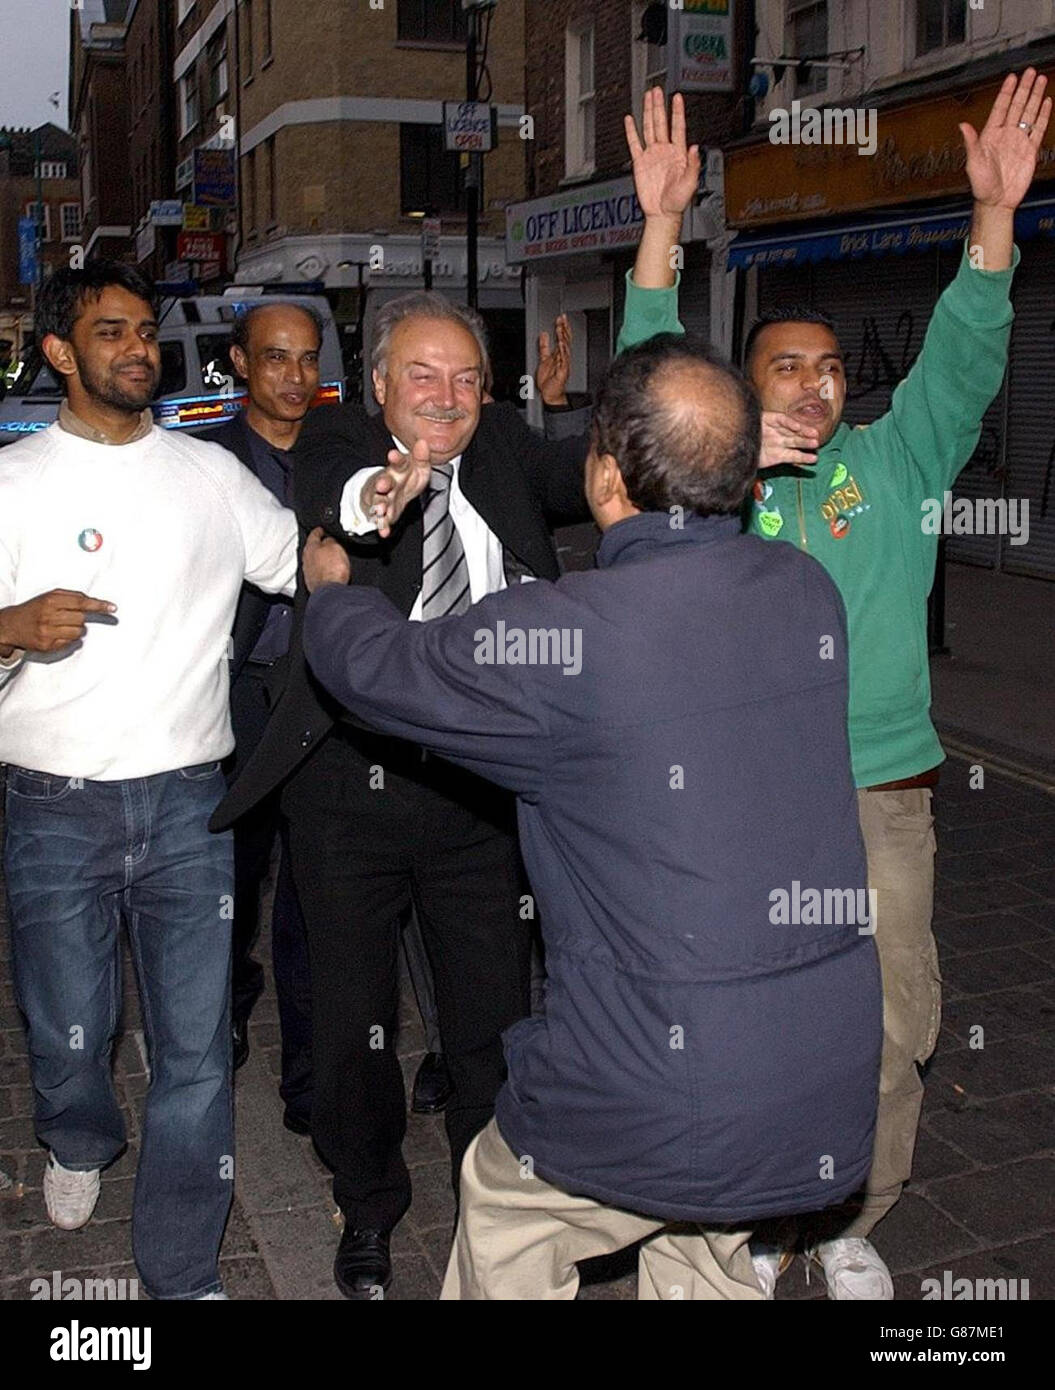 Former Labour MP and new Respect MP for Bethnal Green and Bow, George Galloway, greets supporters in London's Brick Lane. Galloway beat previous Labour MP Oona King for the seat which had been held by Labour since 1945. Stock Photo